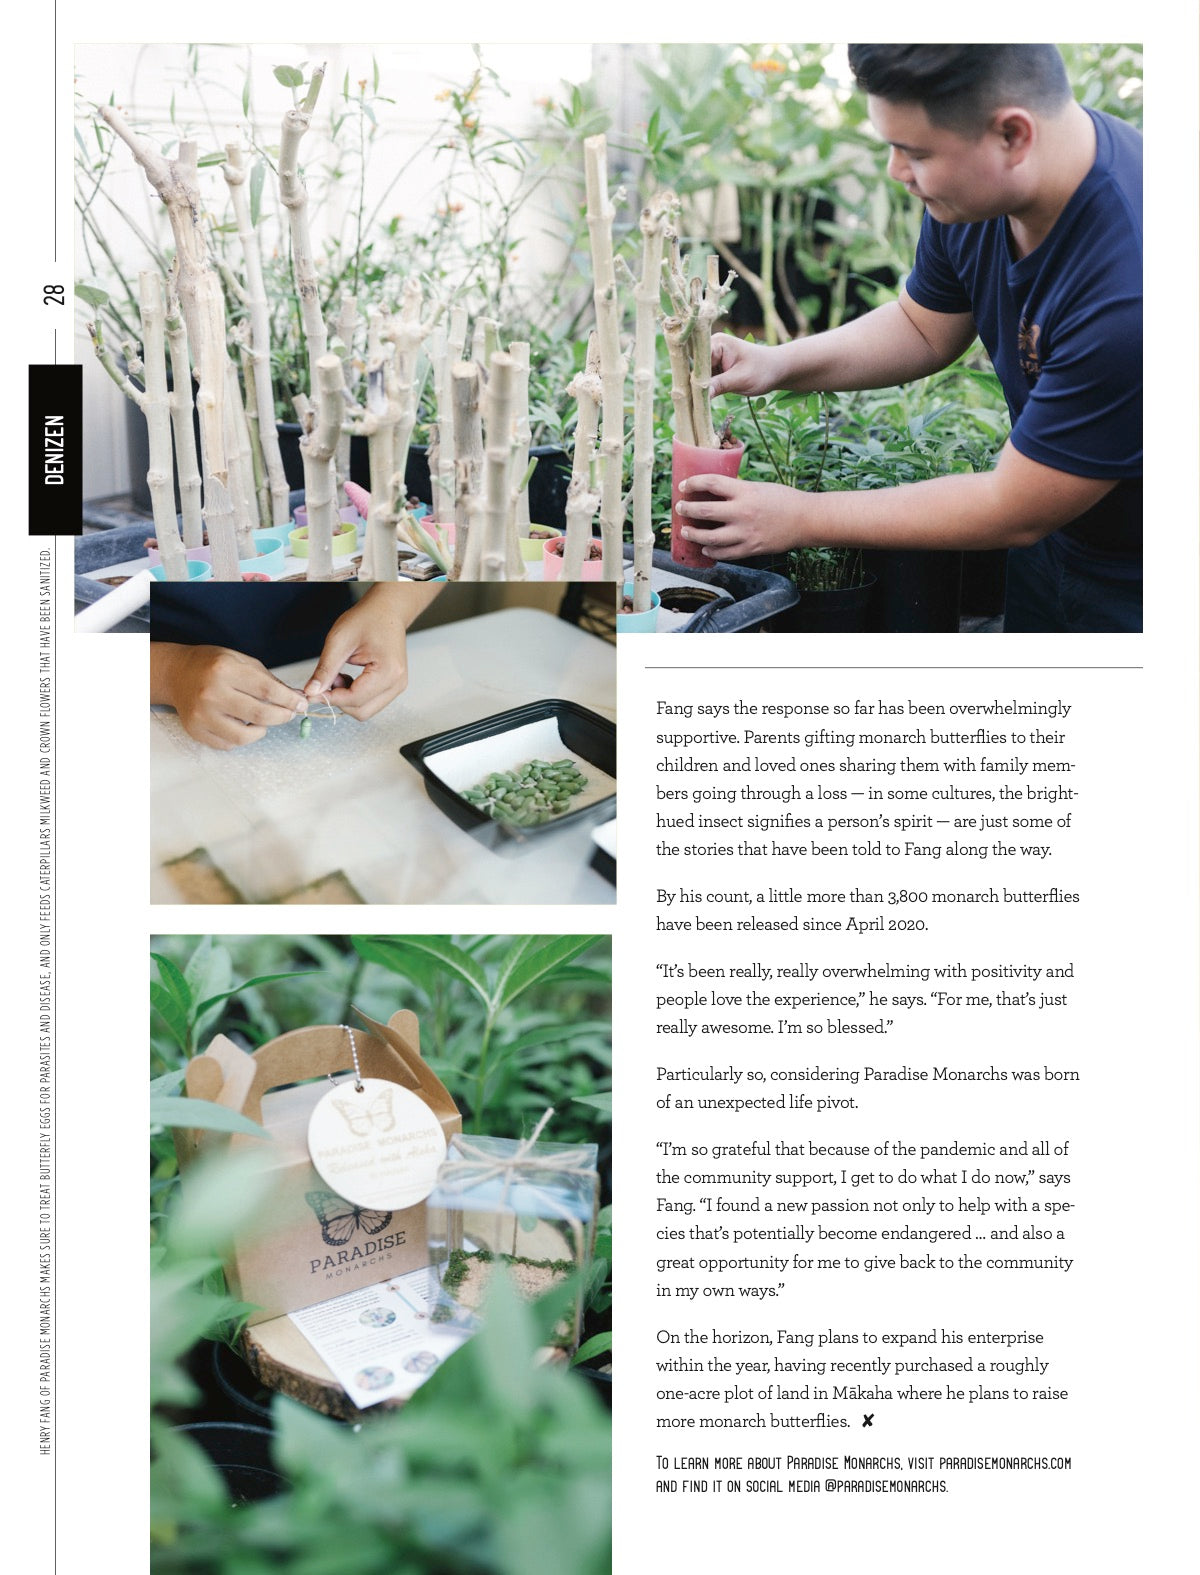 article feature in Kakaako vert magazine. A Hawaii's local publication based in Ward, Kakaako, Honolulu, Oahu, Hawaii. It's a local lifestyle and business magazine. Photo featuring propagating milkweed crown flower plant, tying chrysalis and live monarch butterfly chrysalis box packaging and gift set. 